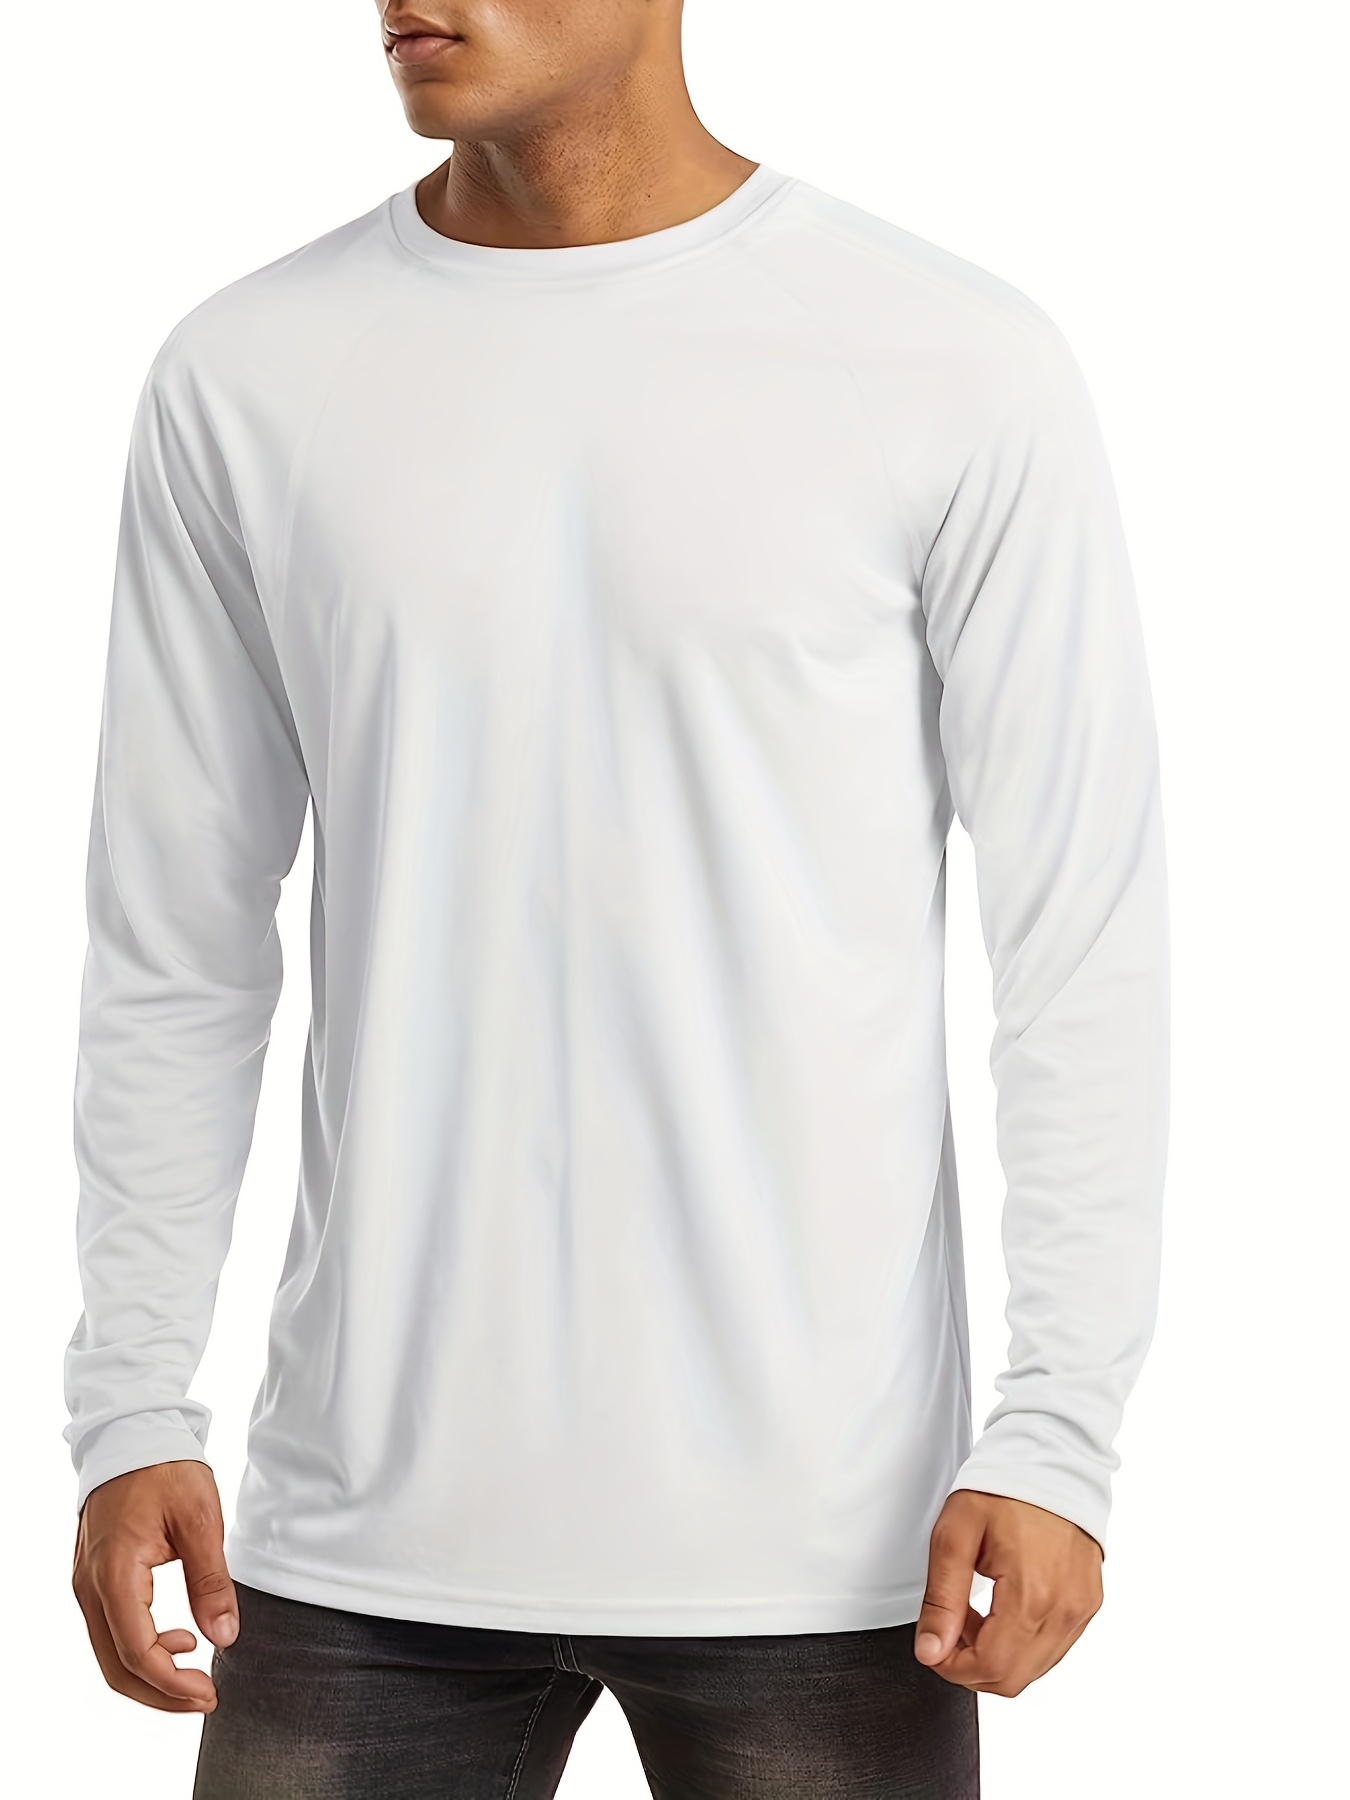 Outdoor Sportswear T-Shirt for Hiking, Running and Gyming